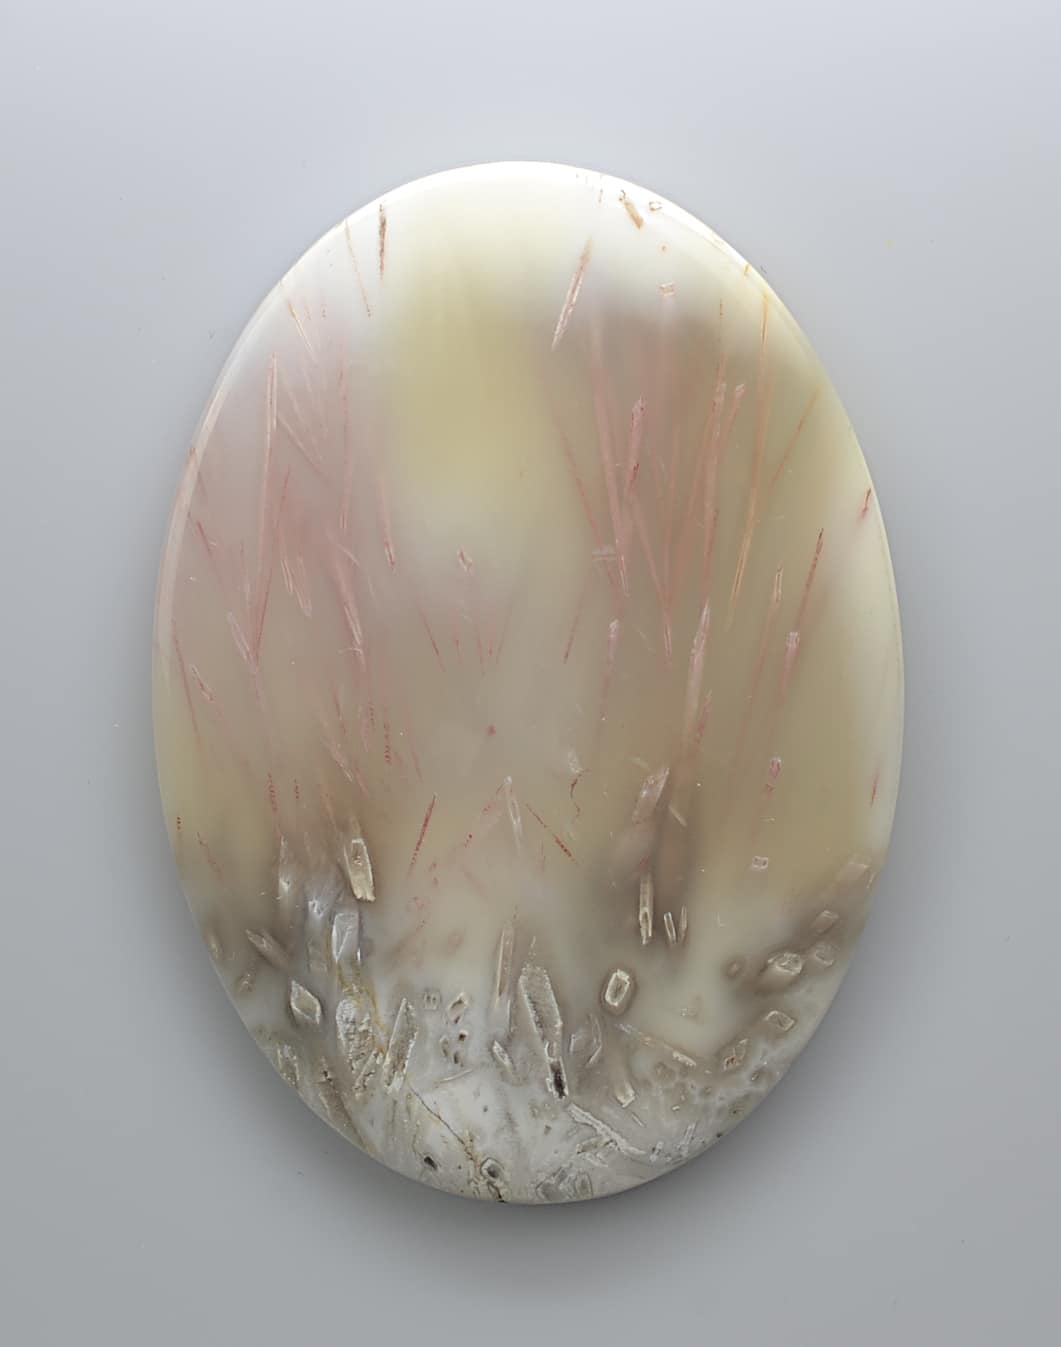 Indonesian Tube Agate 145.85 ct  Oval  Cabochon Collection (1) 69.80 x 34.80 x 4.40 mm c073